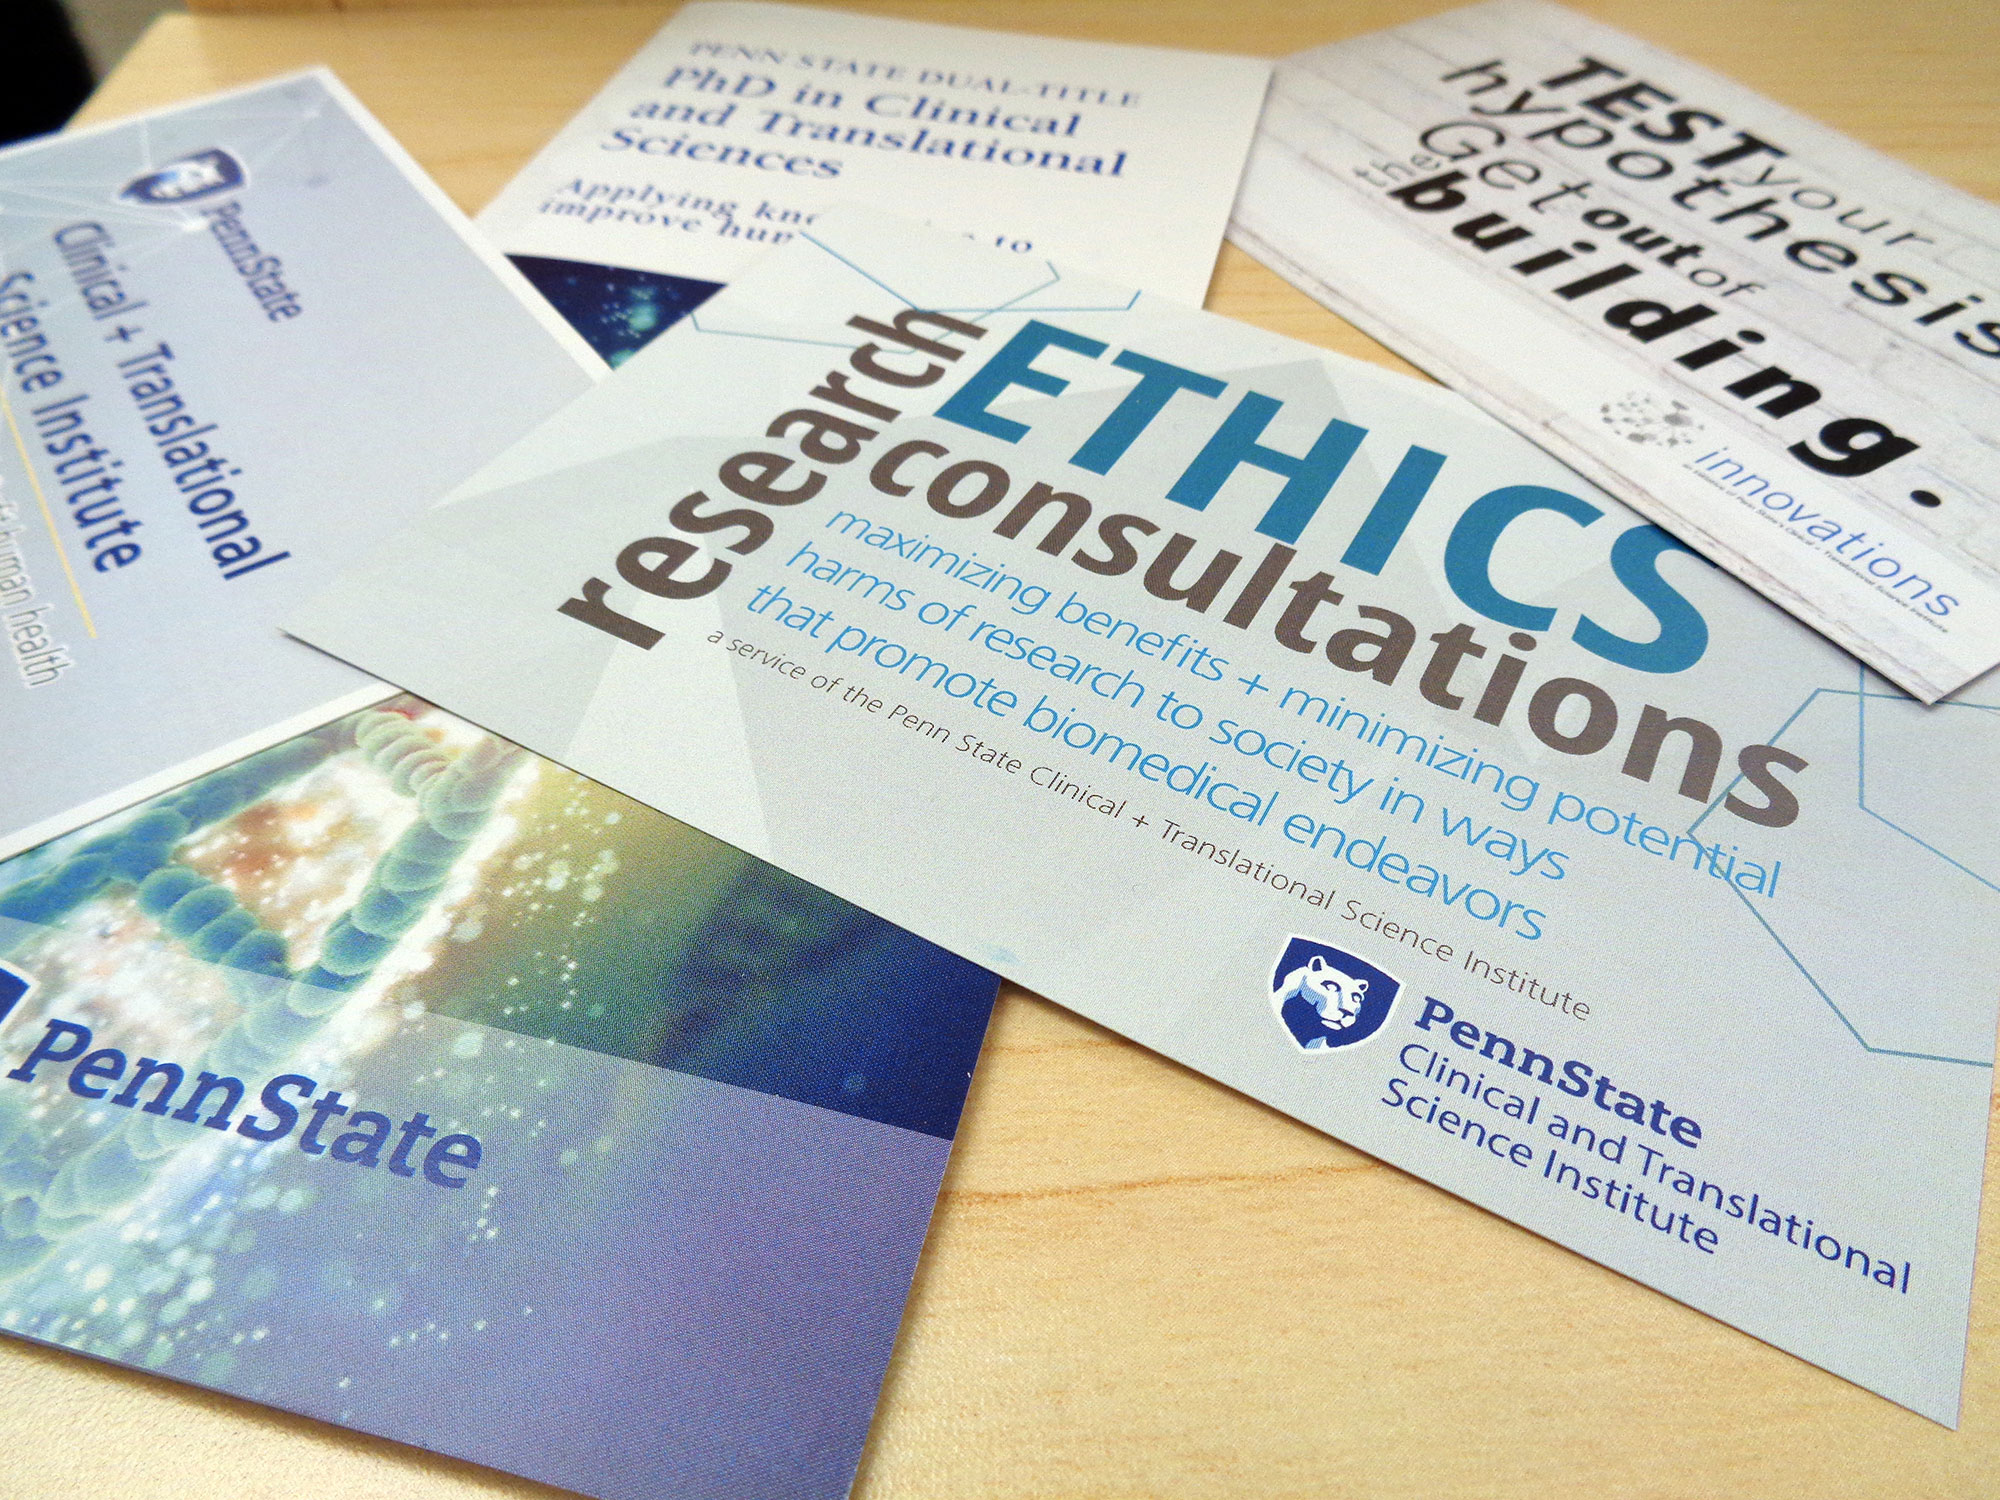 A promotional image for Penn State Clinical and Translational Science Institute shows a number of pamplets and cards advertising CTSI services fanned out on a table. The words 